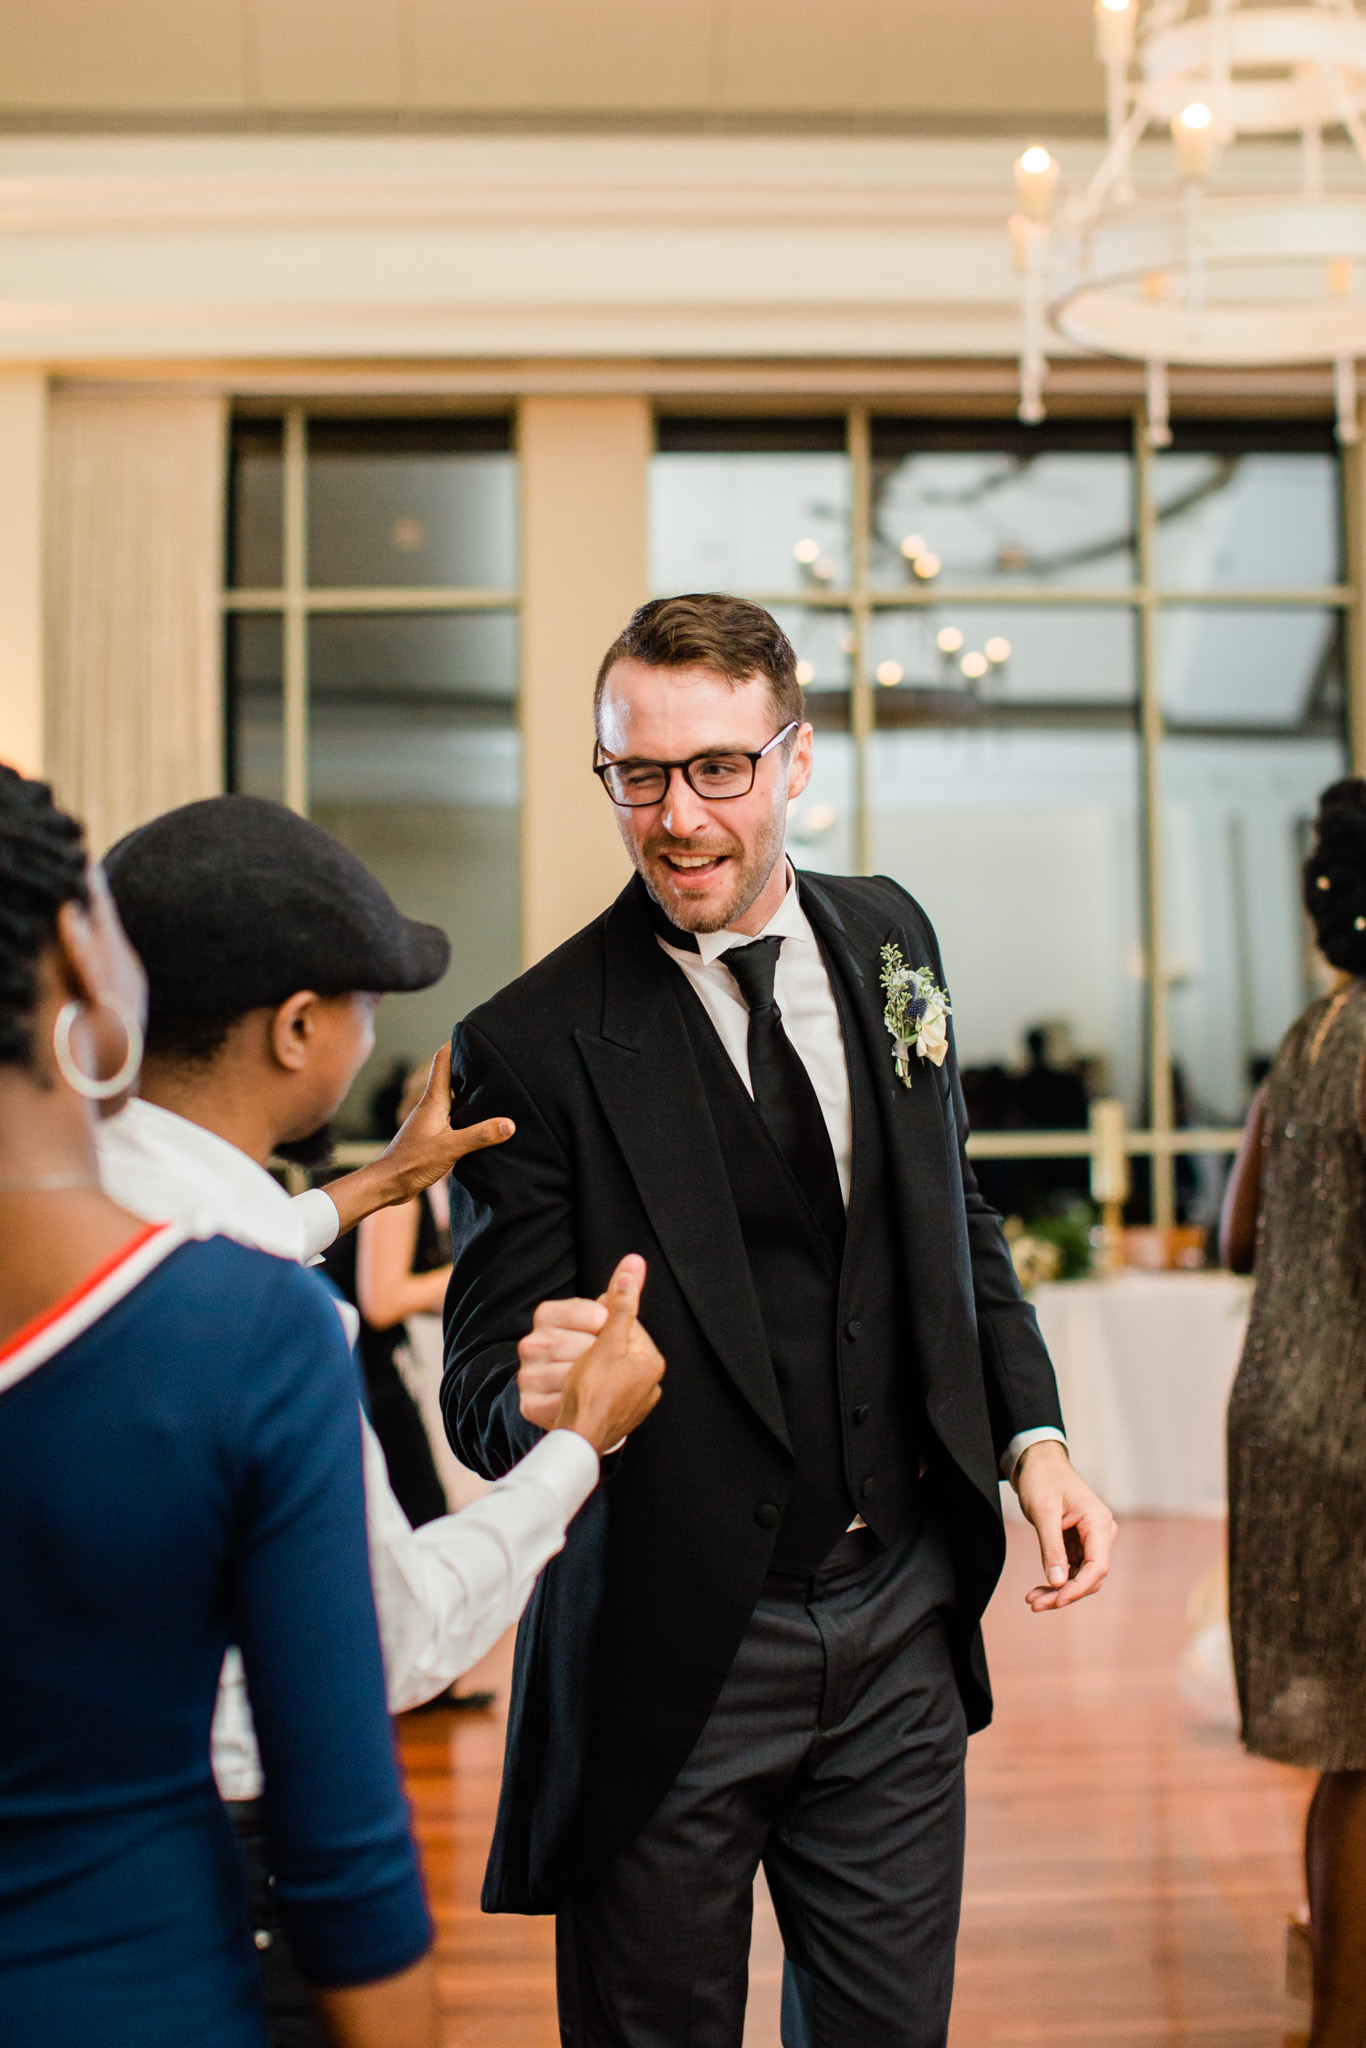 Groom winks while being congratulated by wedding guest. Top Atlanta wedding photographer Rebecca Cerasani